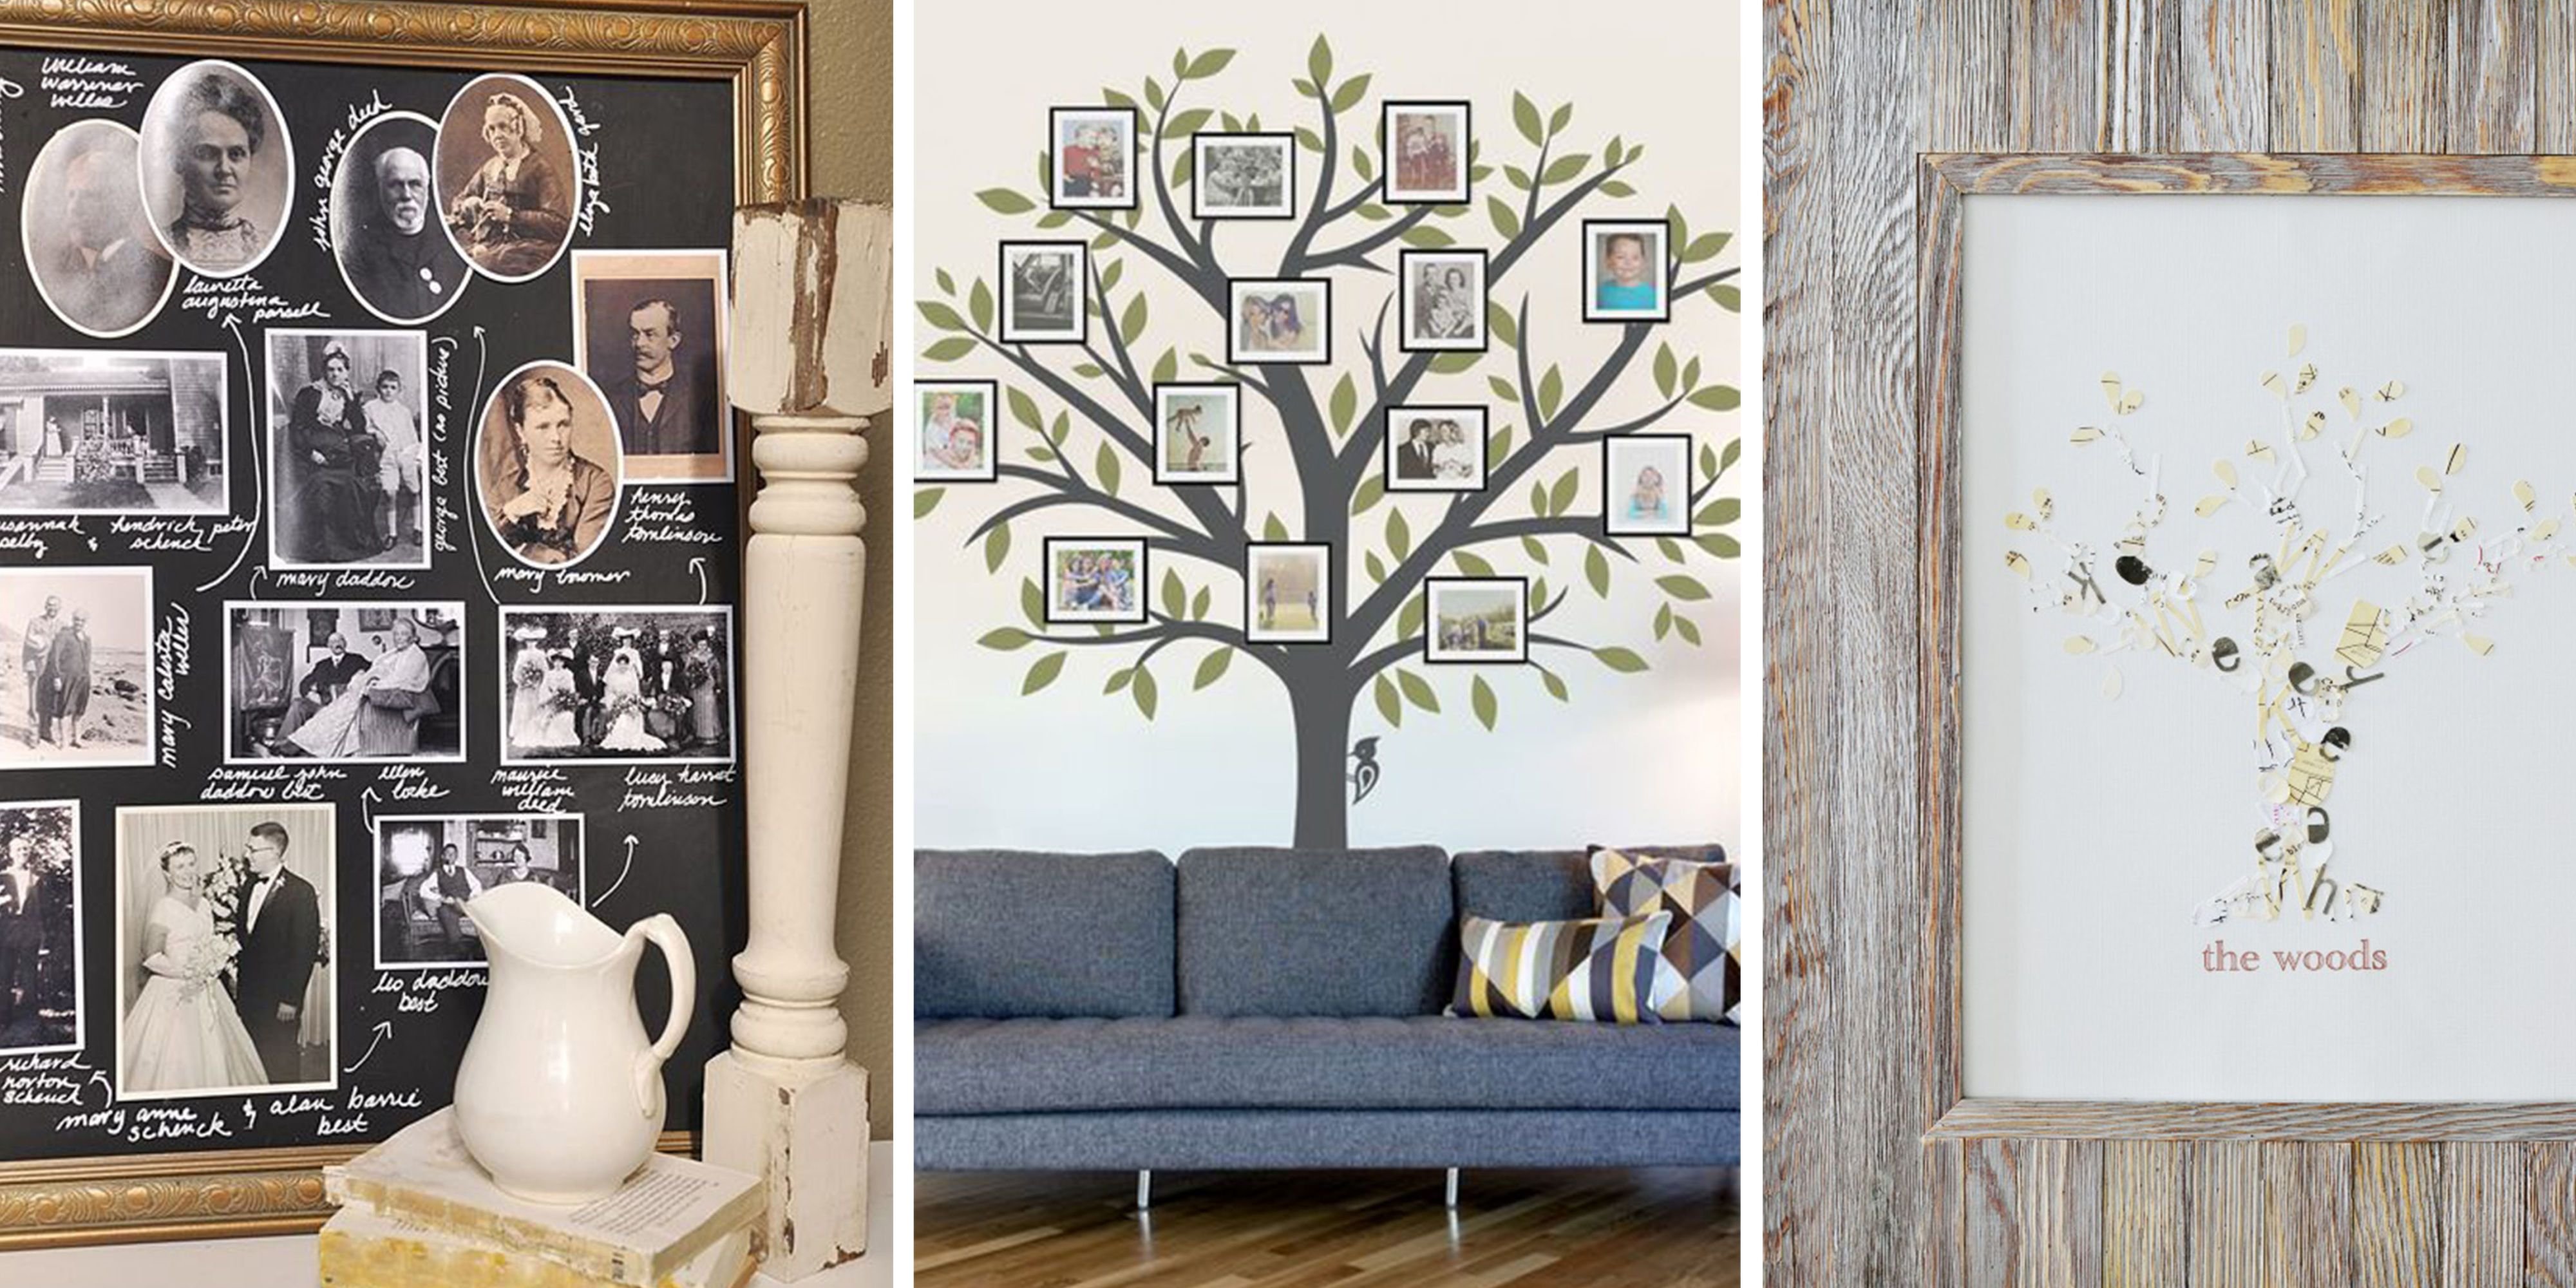 Family Tree Charts To Fill In Genealogy Poster Art Wall Decor For Living  Room Family History - AliExpress